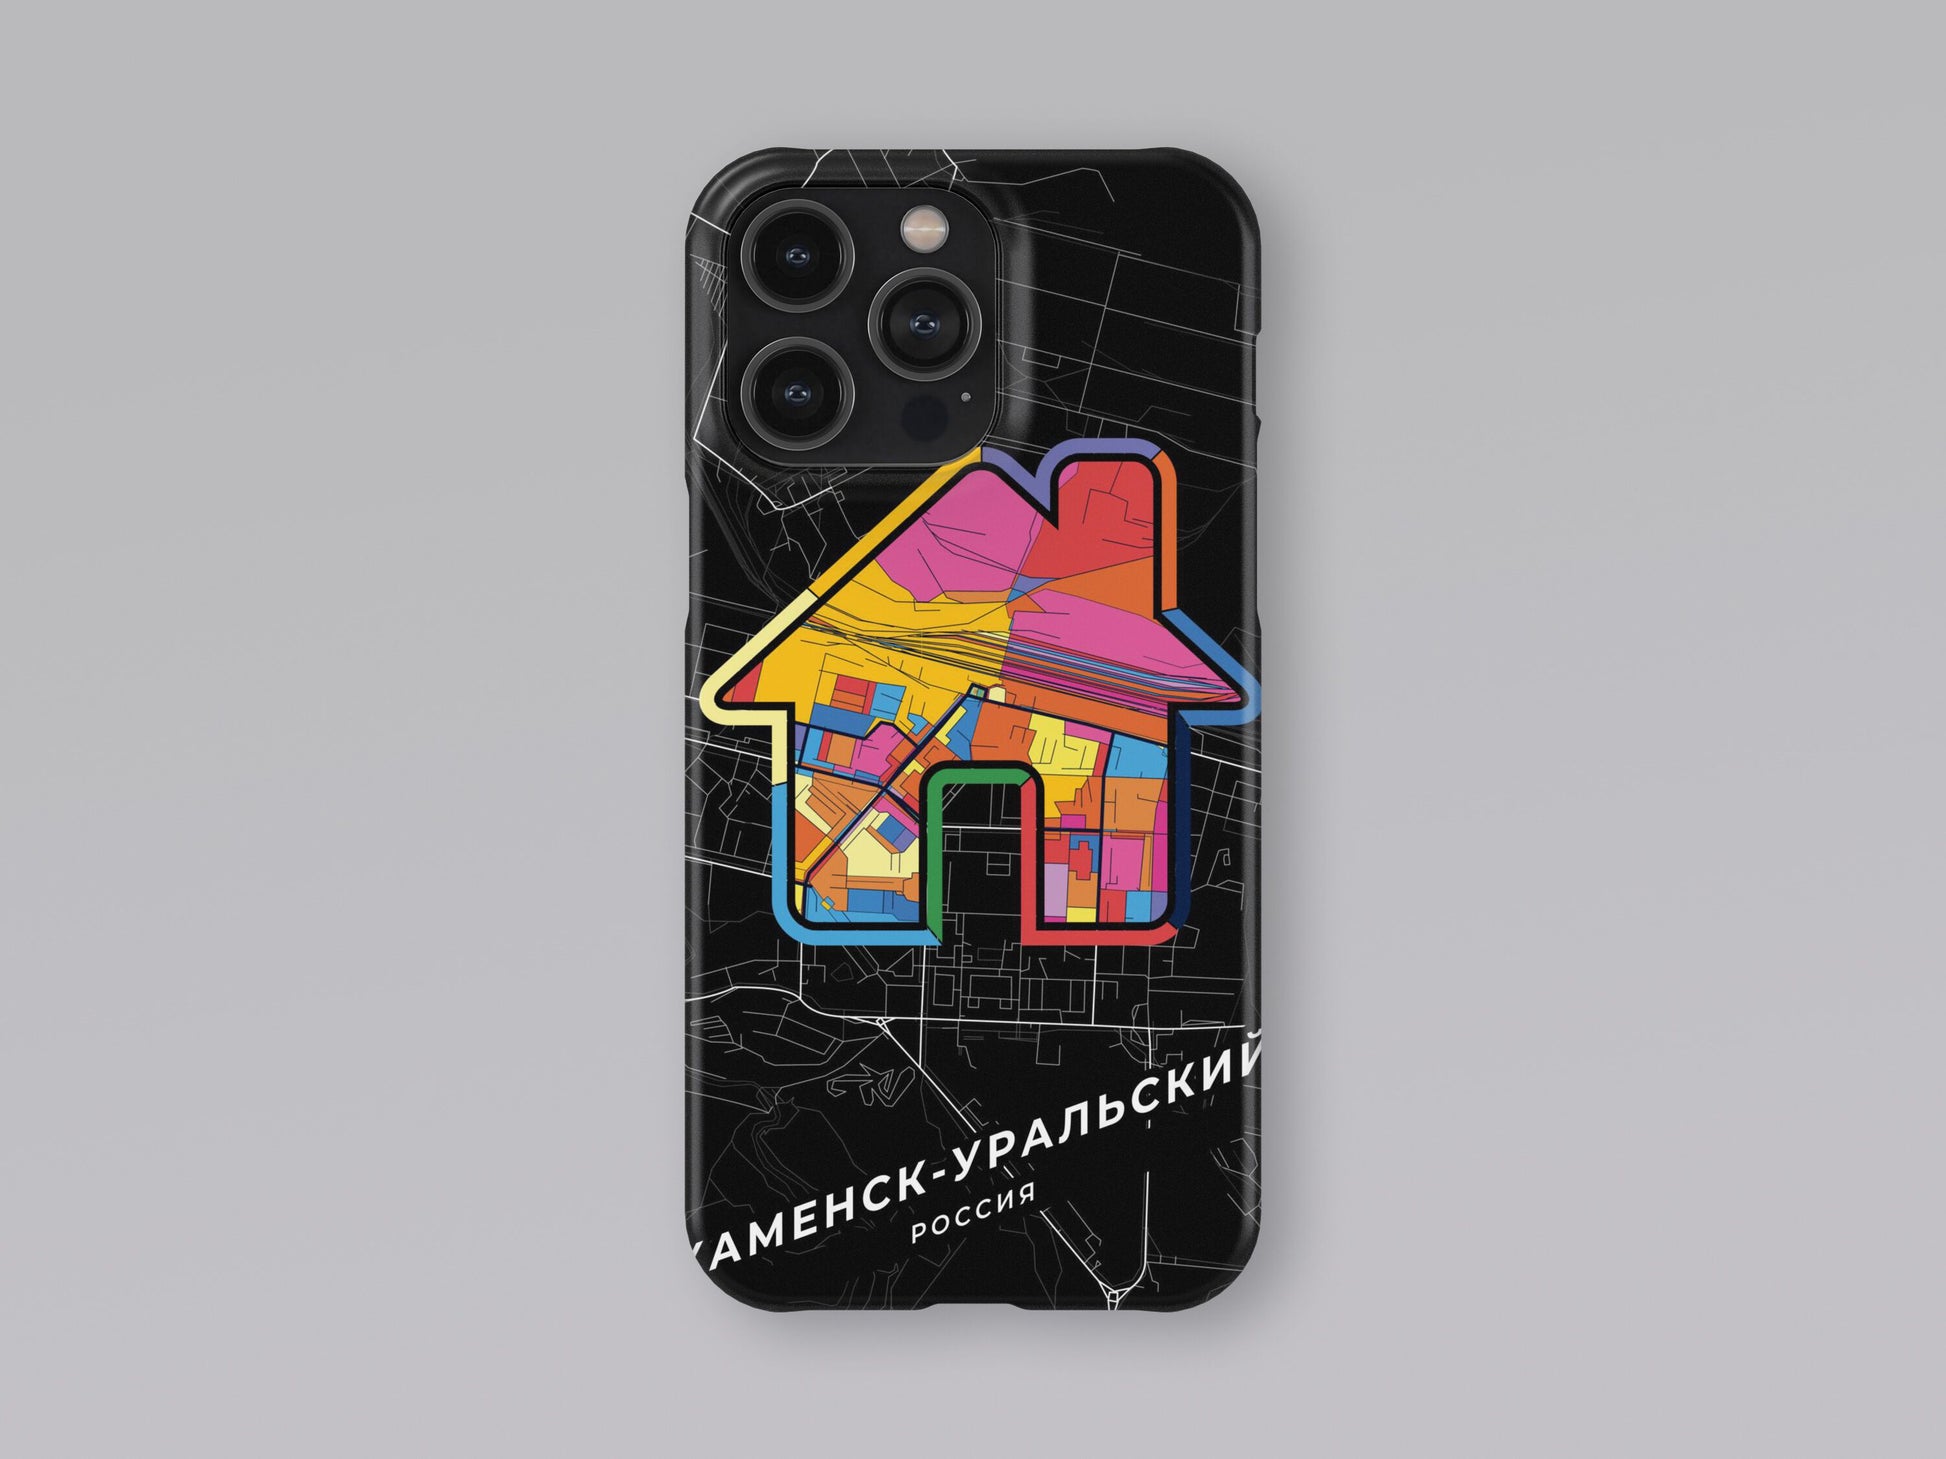 Kamensk-Uralsky Russia slim phone case with colorful icon. Birthday, wedding or housewarming gift. Couple match cases. 3